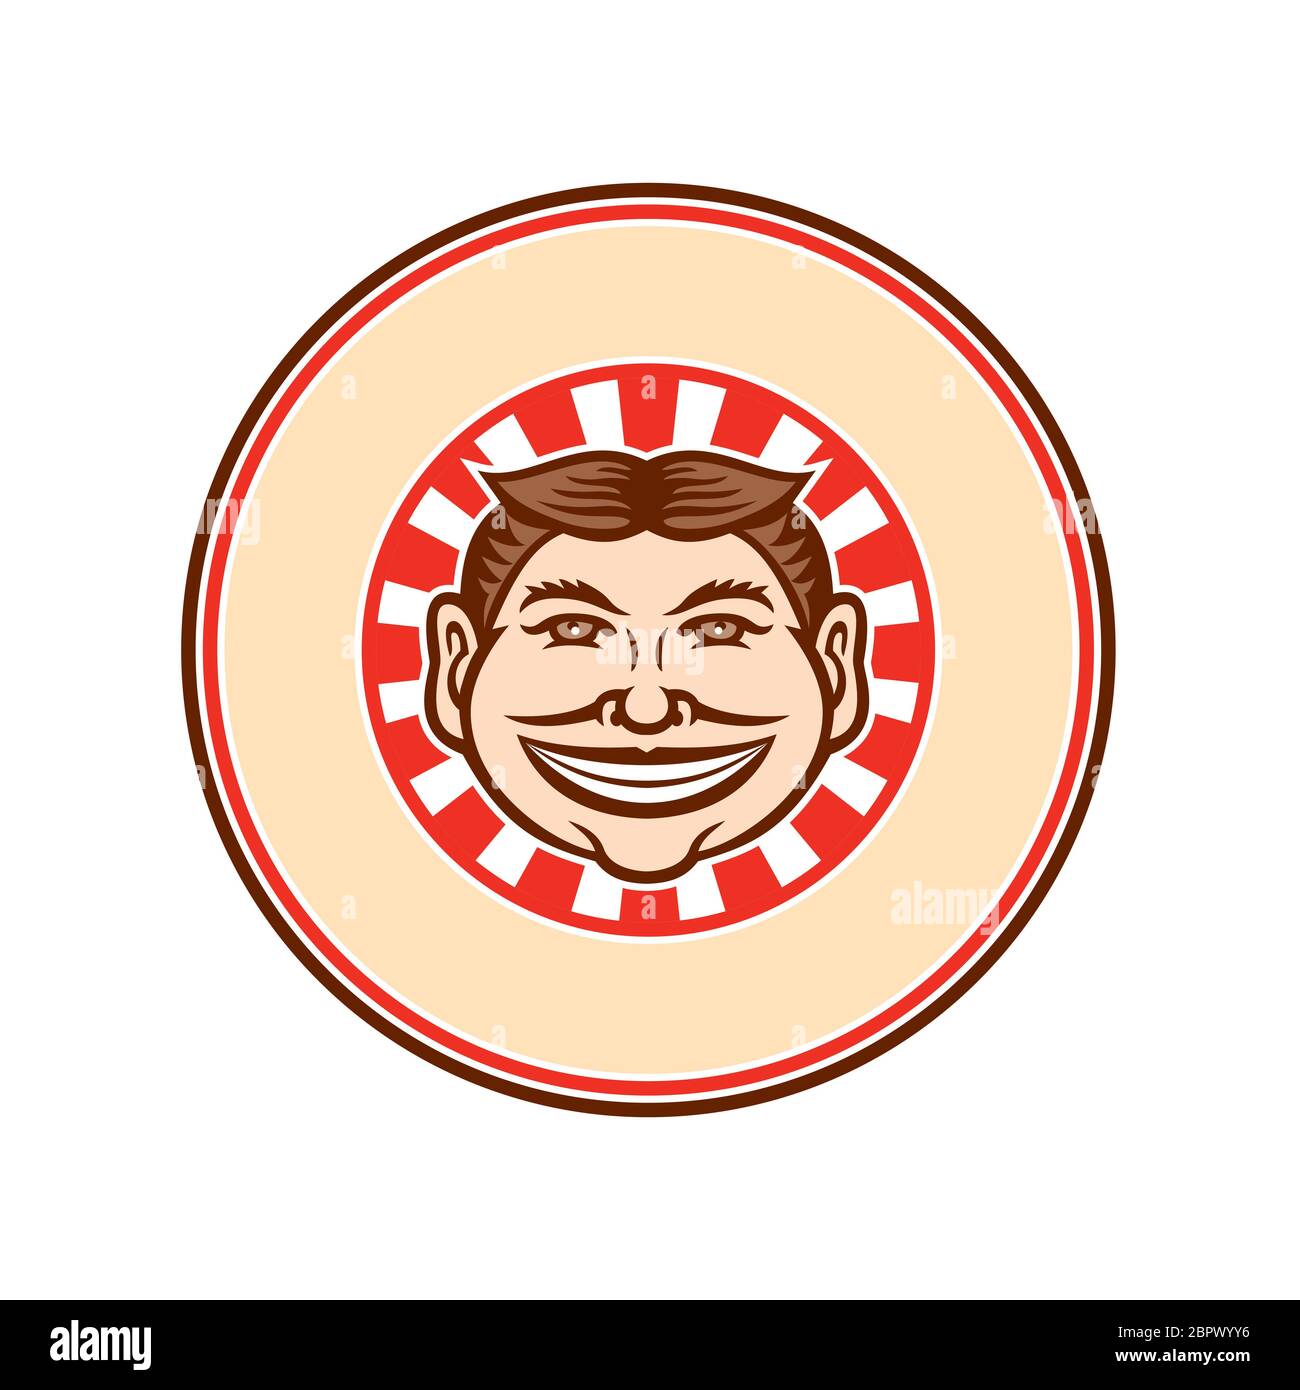 Mascot icon illustration of head of a grinning, leering, smiling funny face slyly beaming mug with hair parted in middle viewed from front with sunbur Stock Photo